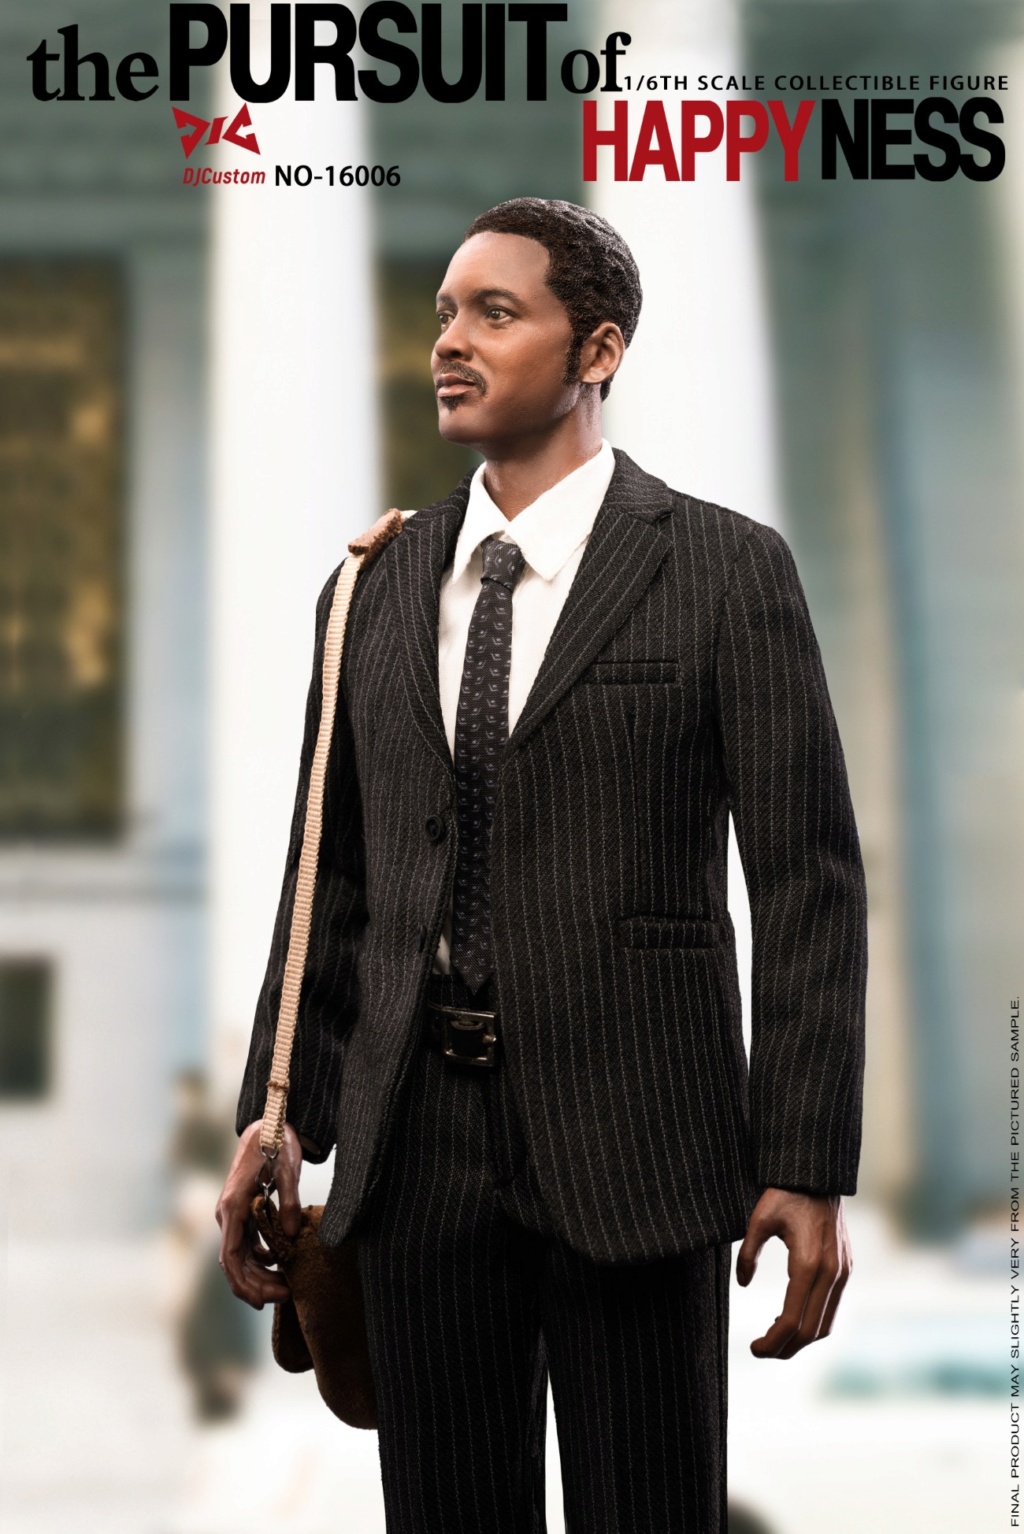 NEW PRODUCT: DJ-CUSTOM: 1/6 "Pursuit of Happyness" Collectible Doll Set 12210010